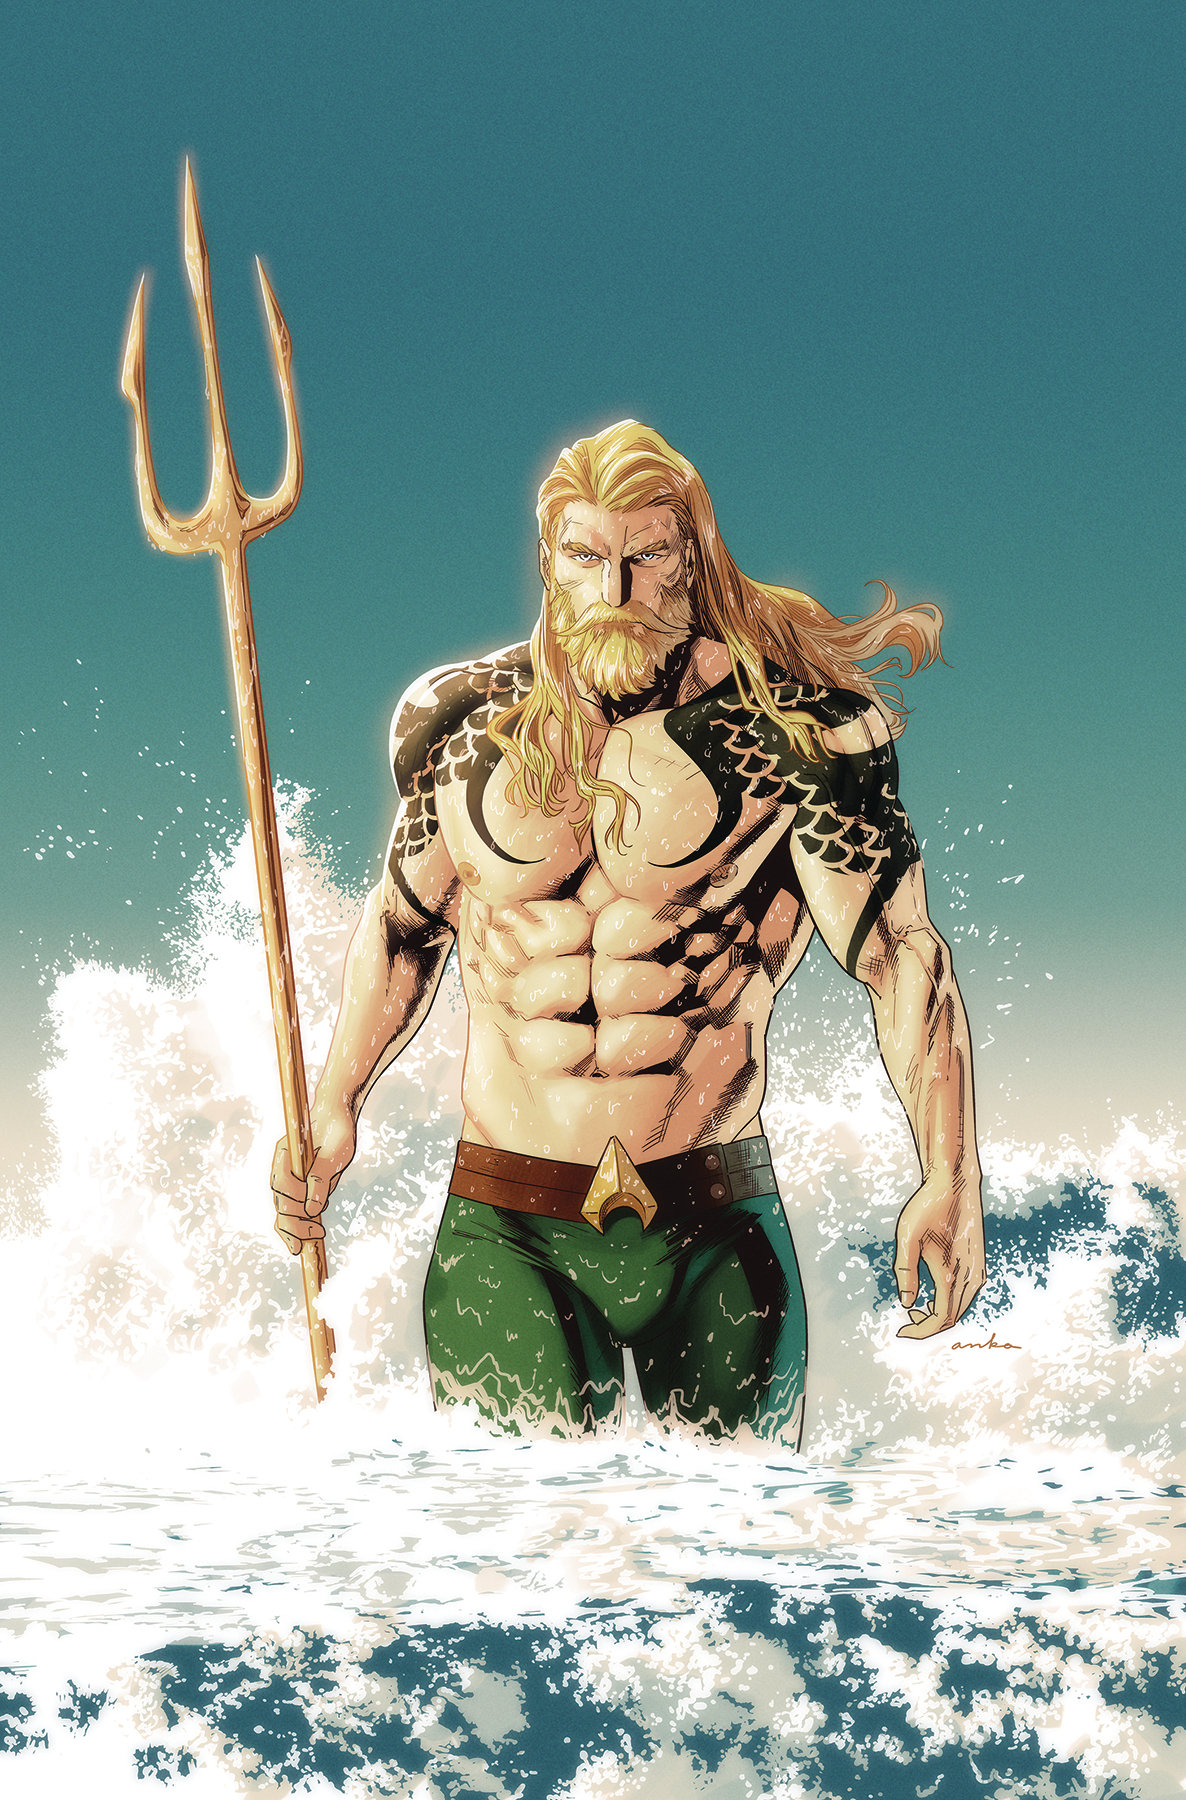 https://static.wikia.nocookie.net/marvel_dc/images/4/43/Aquaman_Vol_8_57_Textless_Variant.jpg/revision/latest?cb=20200225135152